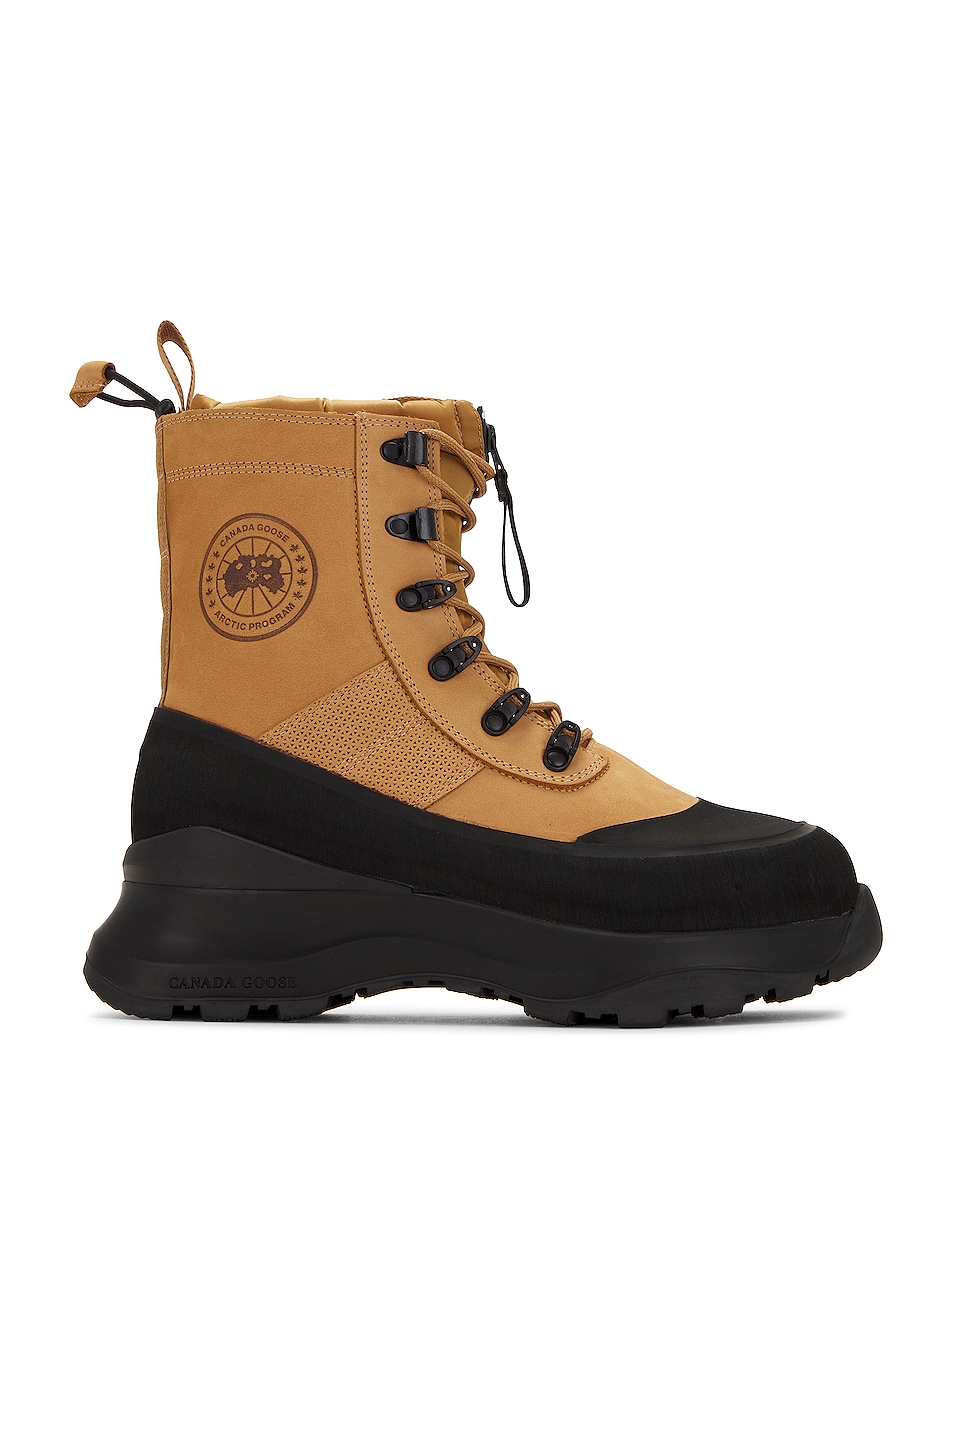 Image 1 of Canada Goose Armstrong Boot in Tundra Clay & Black